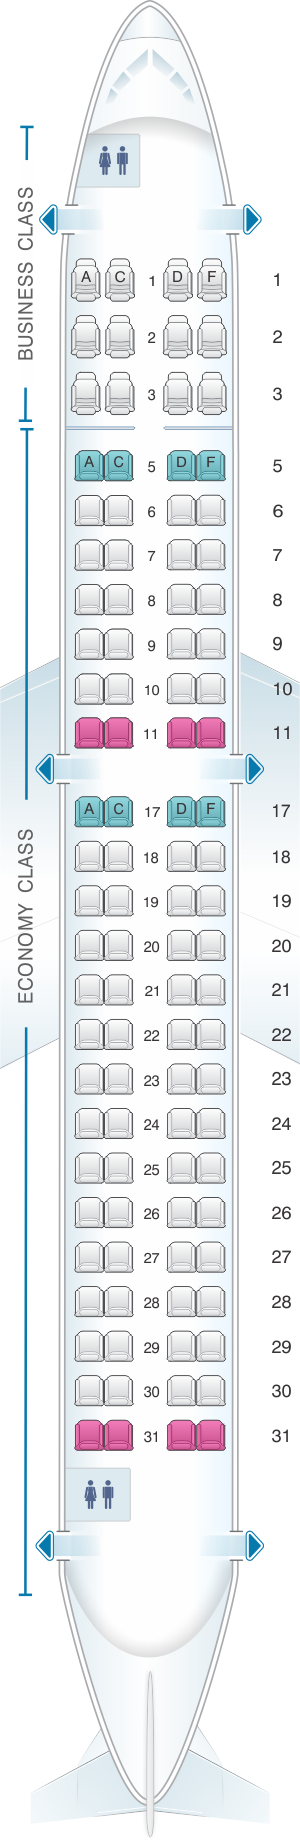 Seat map for Copa Airlines Embraer ERJ 190B